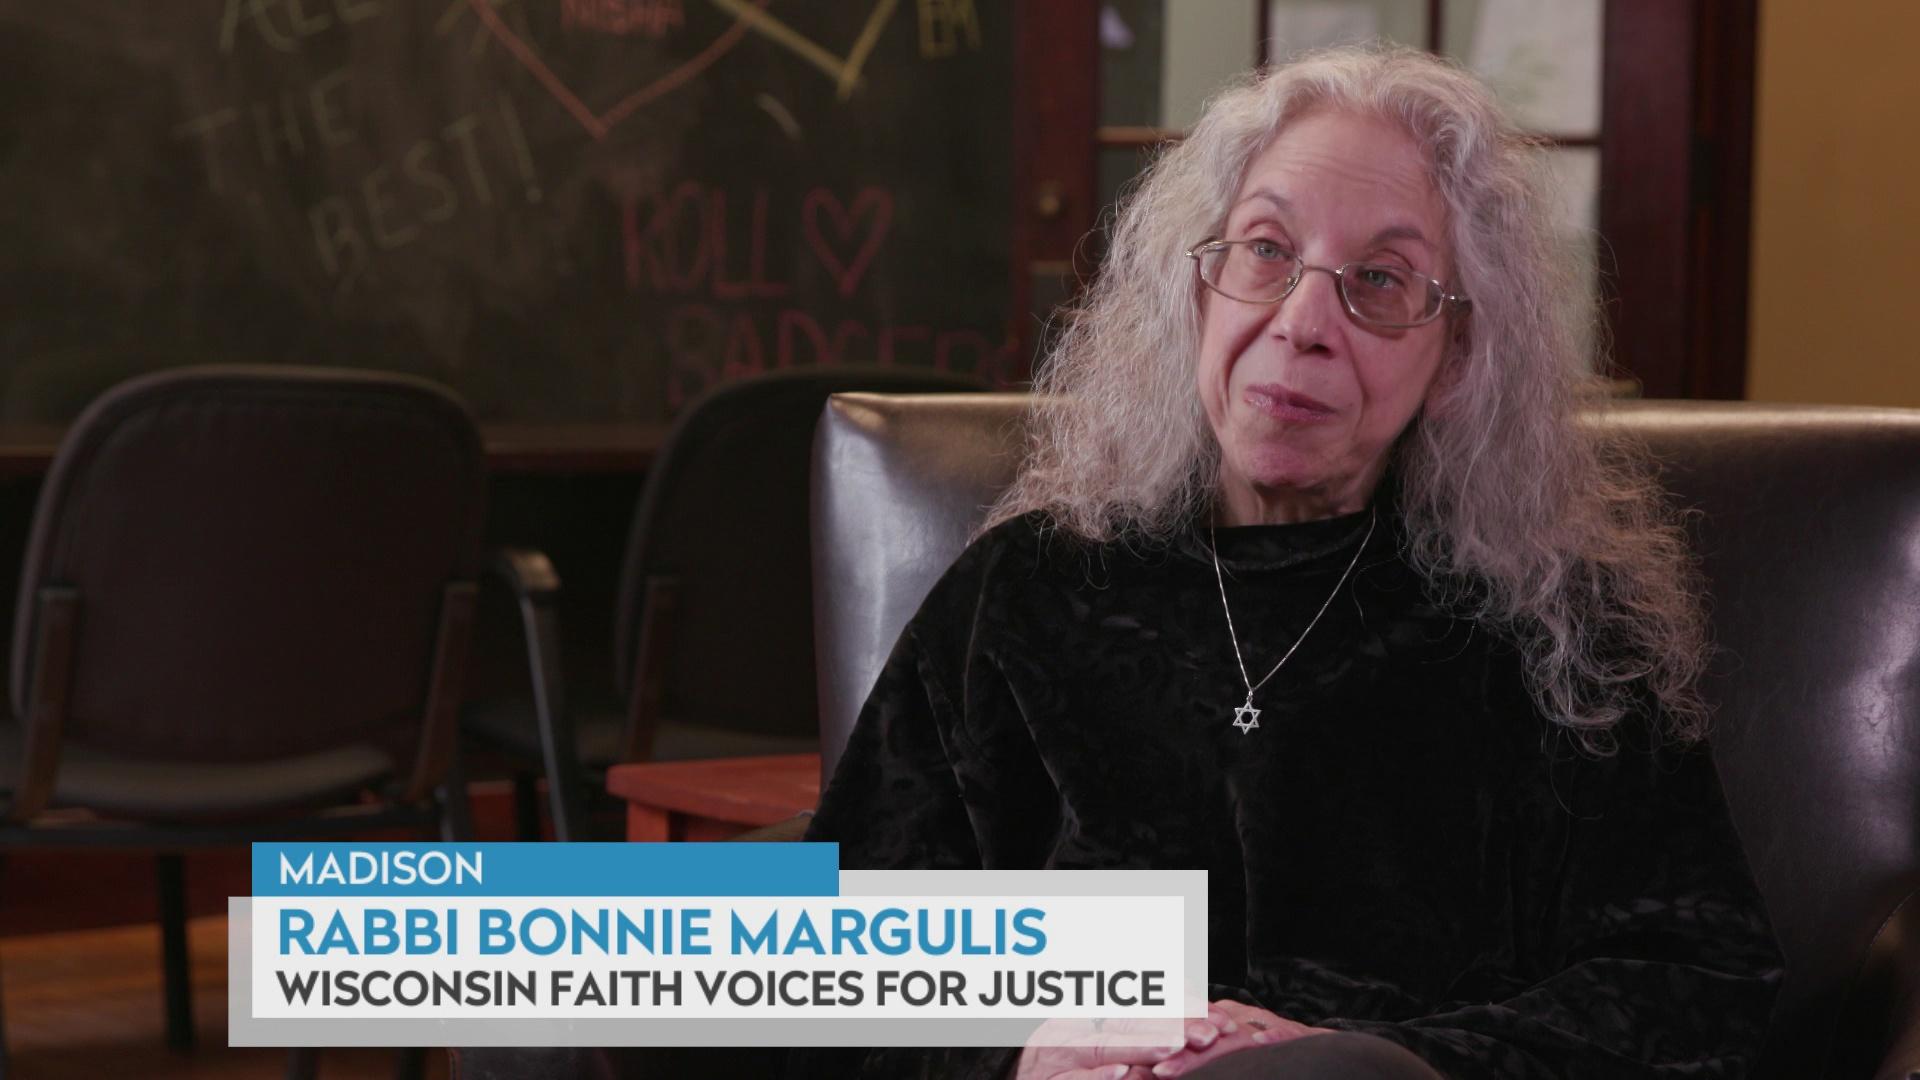 Rabbi Bonnie Margulis on young people learning civic values